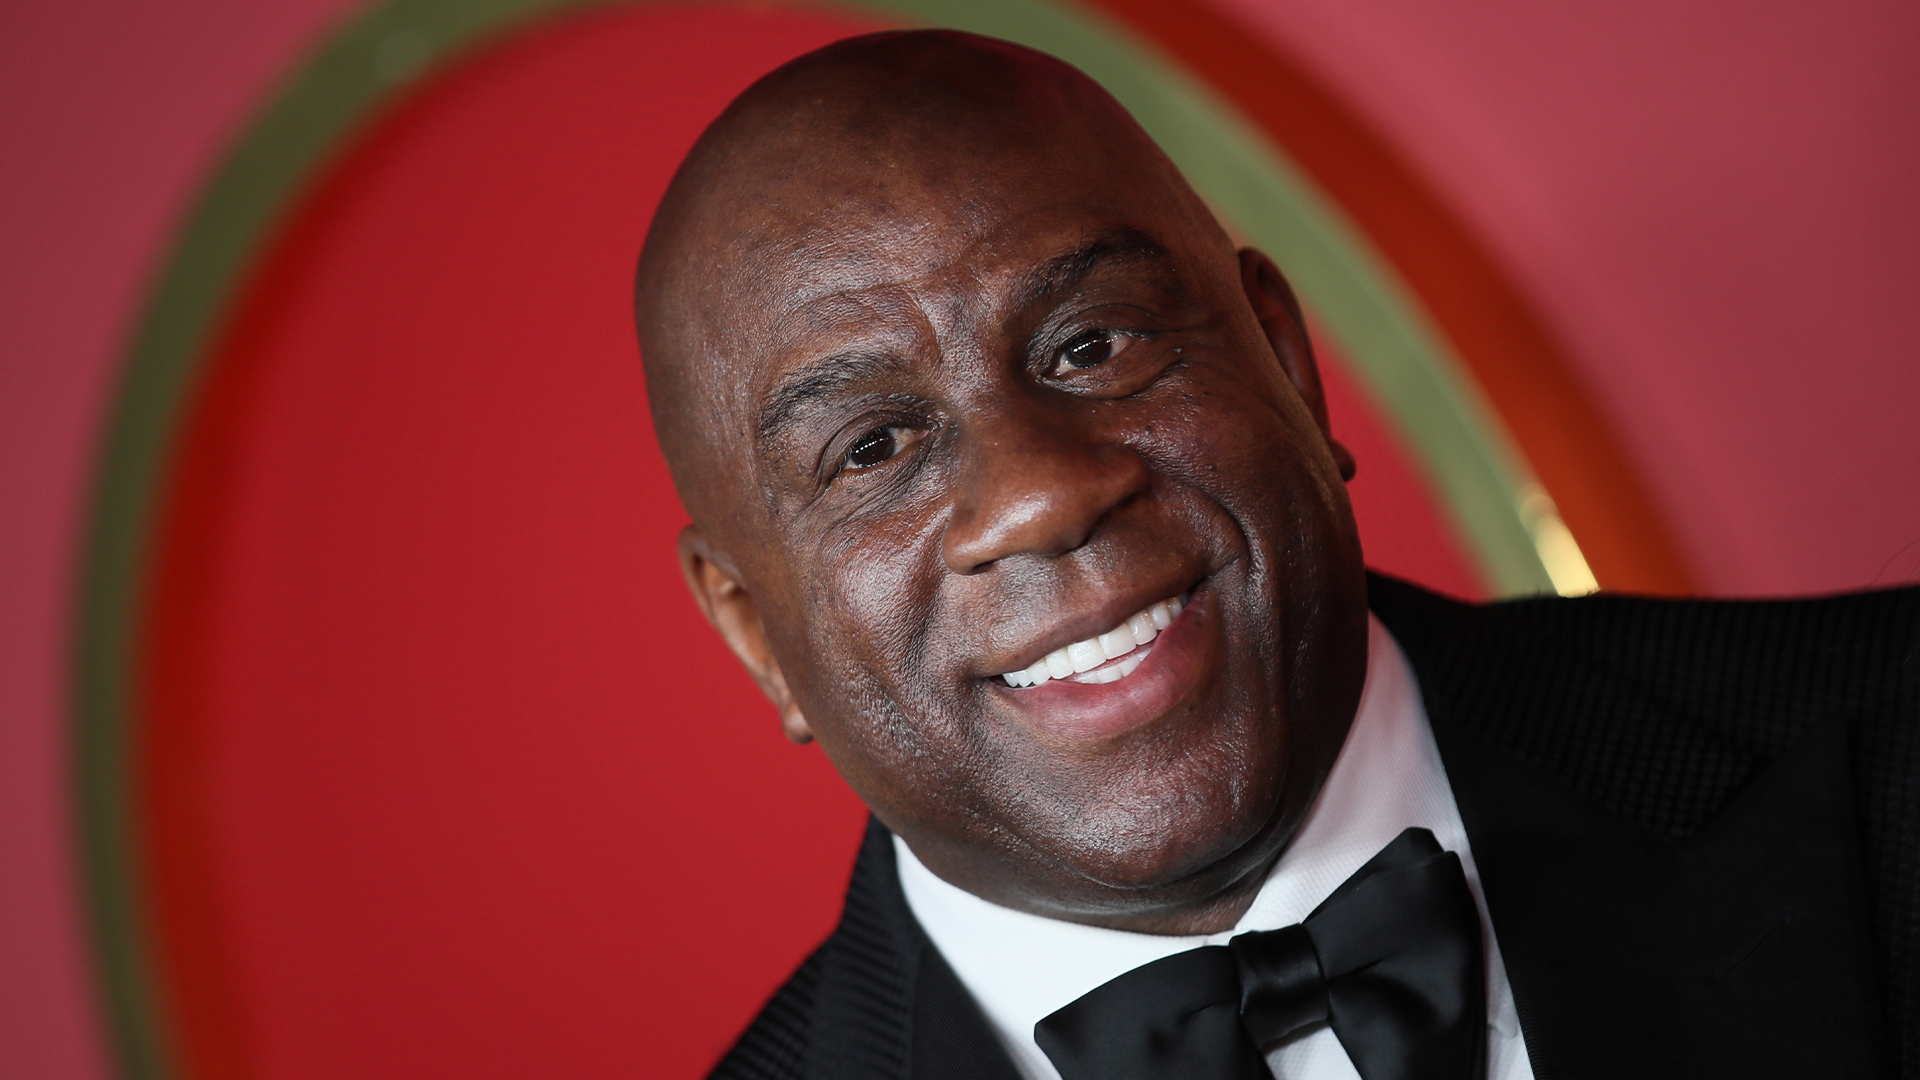 Magic Johnson Reportedly Now A Billionaire, EquiTrust Life Insurance Co. Credited As His Primary Source of Wealth